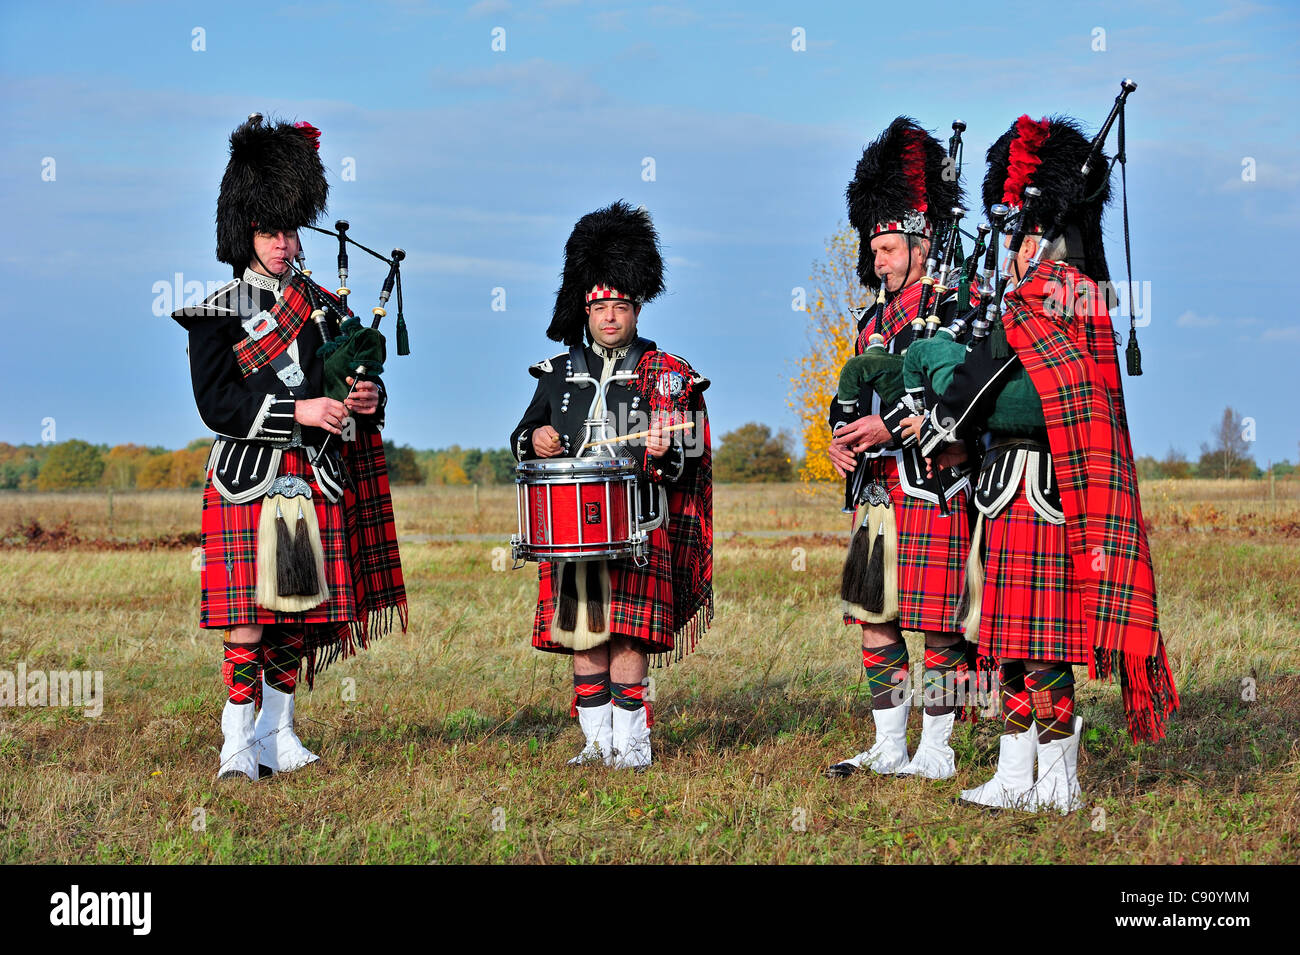 Scottish Highland bagpipers playing pipes and drums in heathland, Scotland, UK Stock Photo